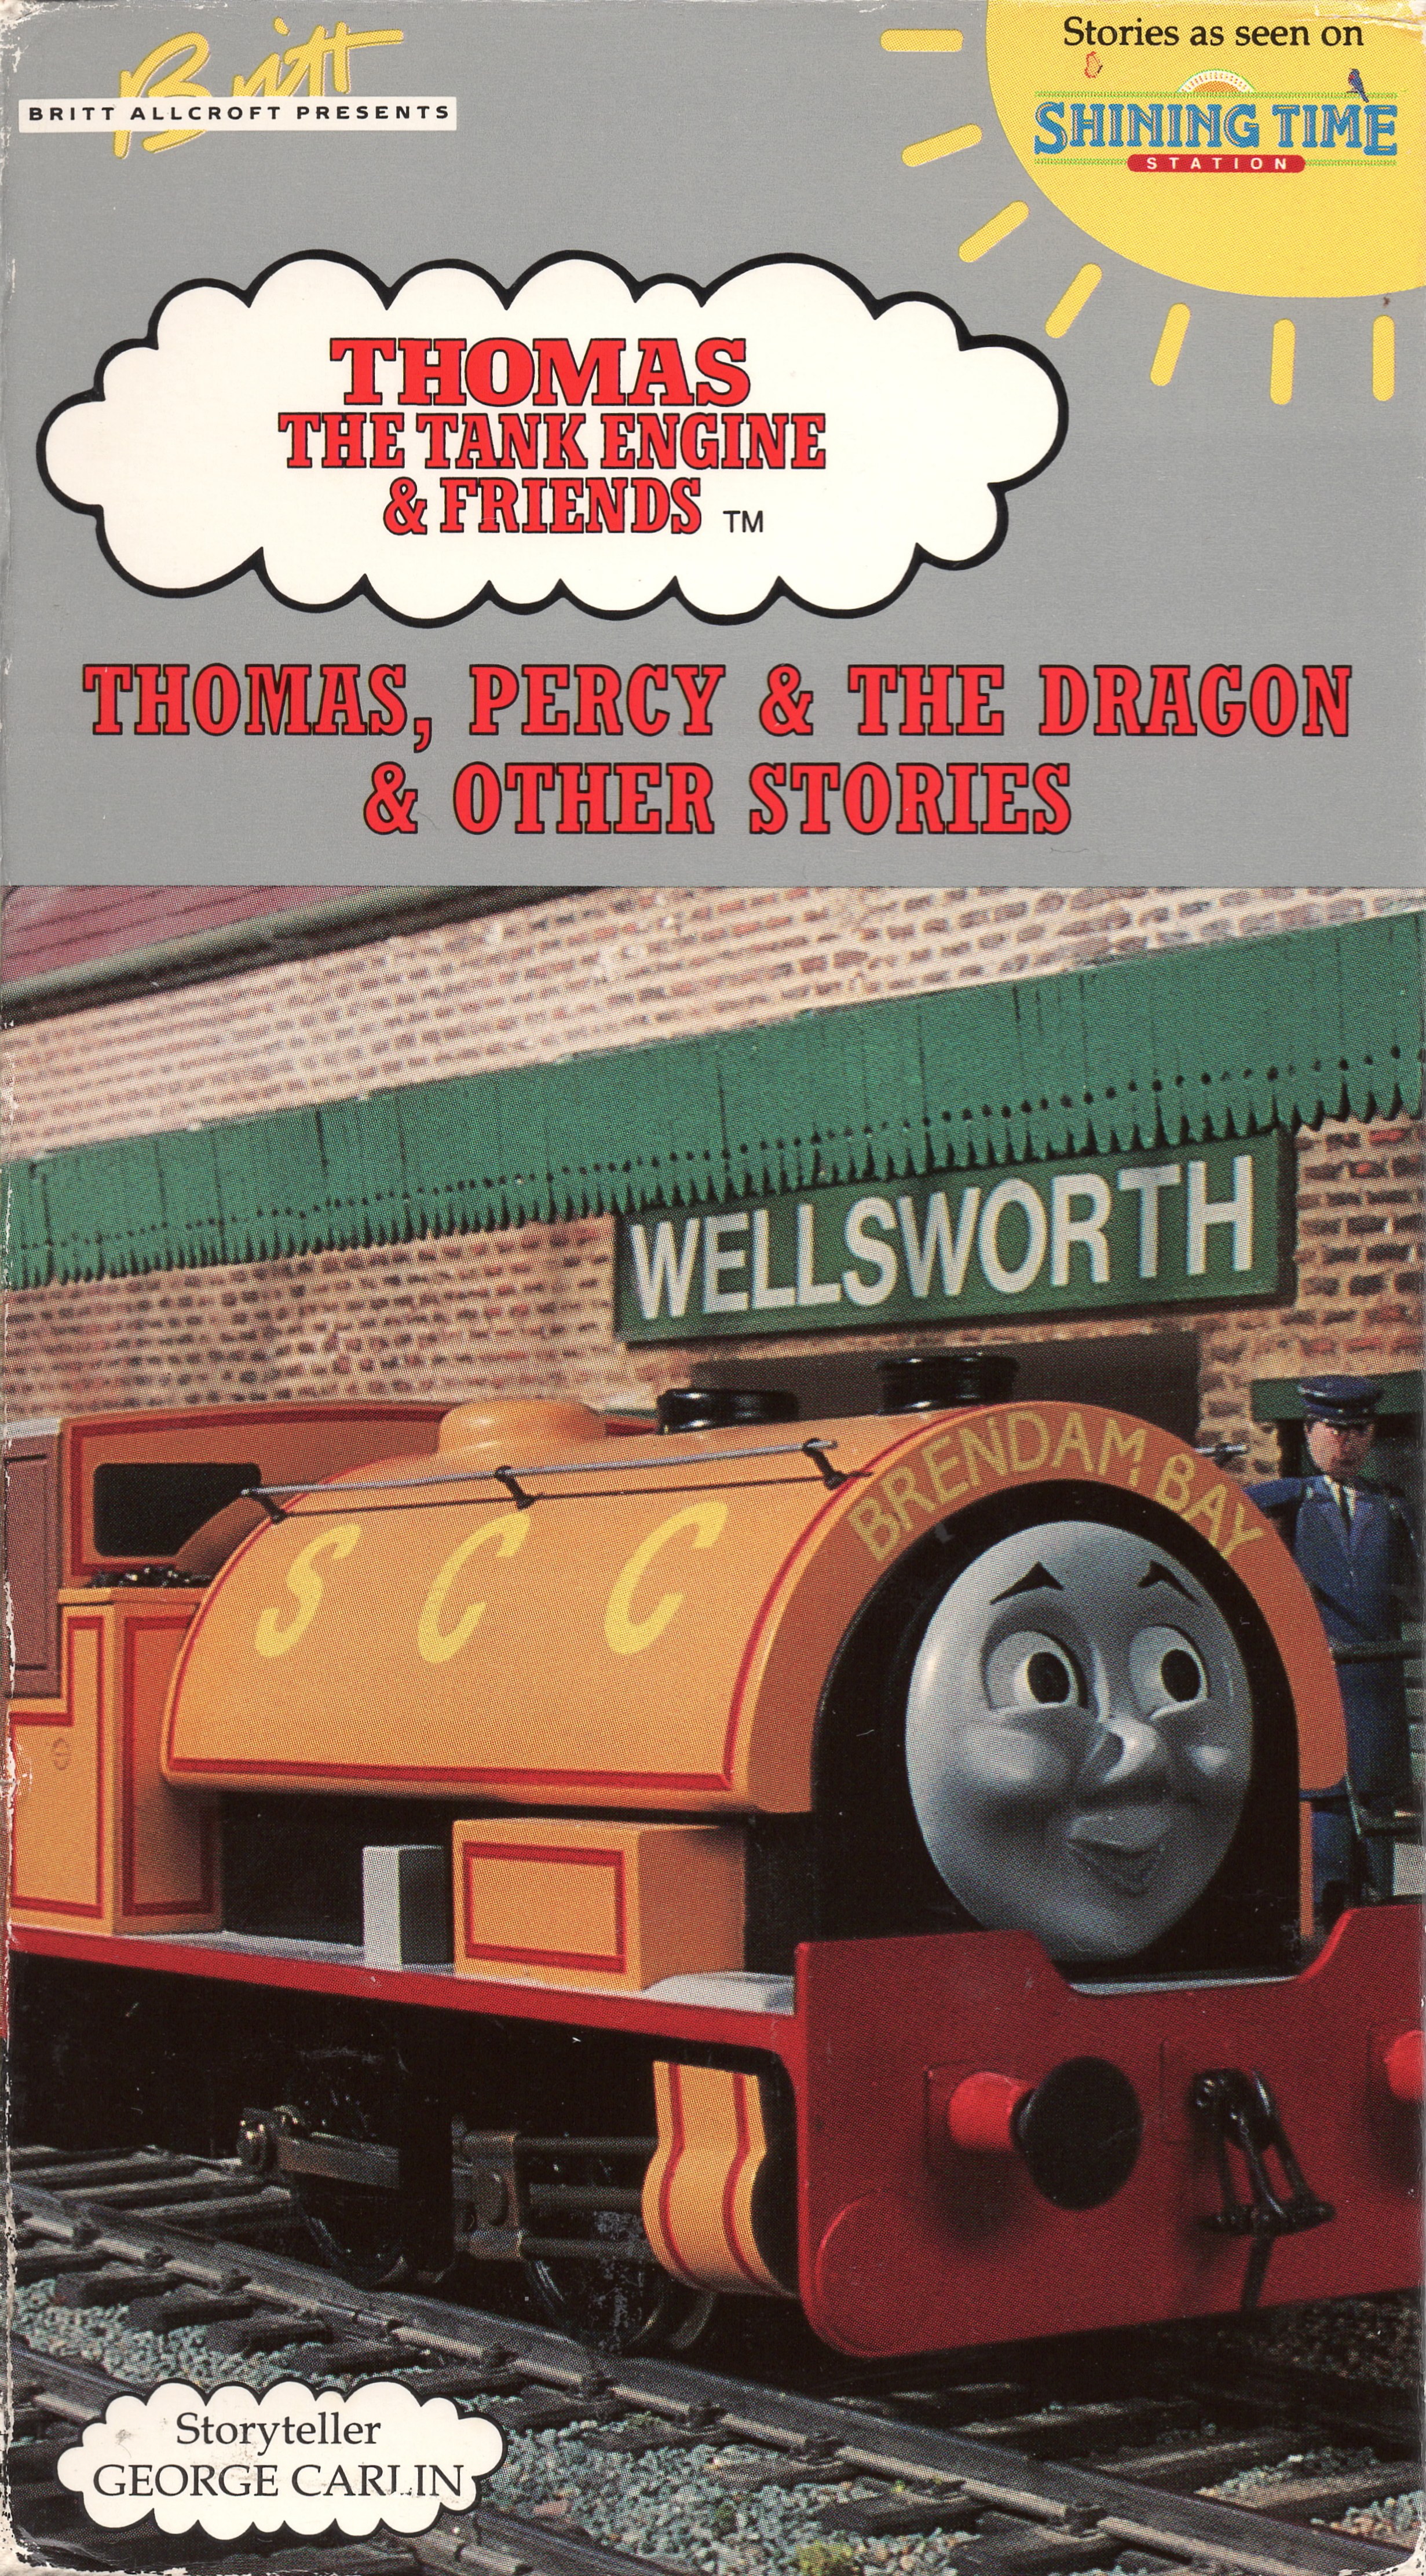 Thomas, Percy and the Dragon [DVD]